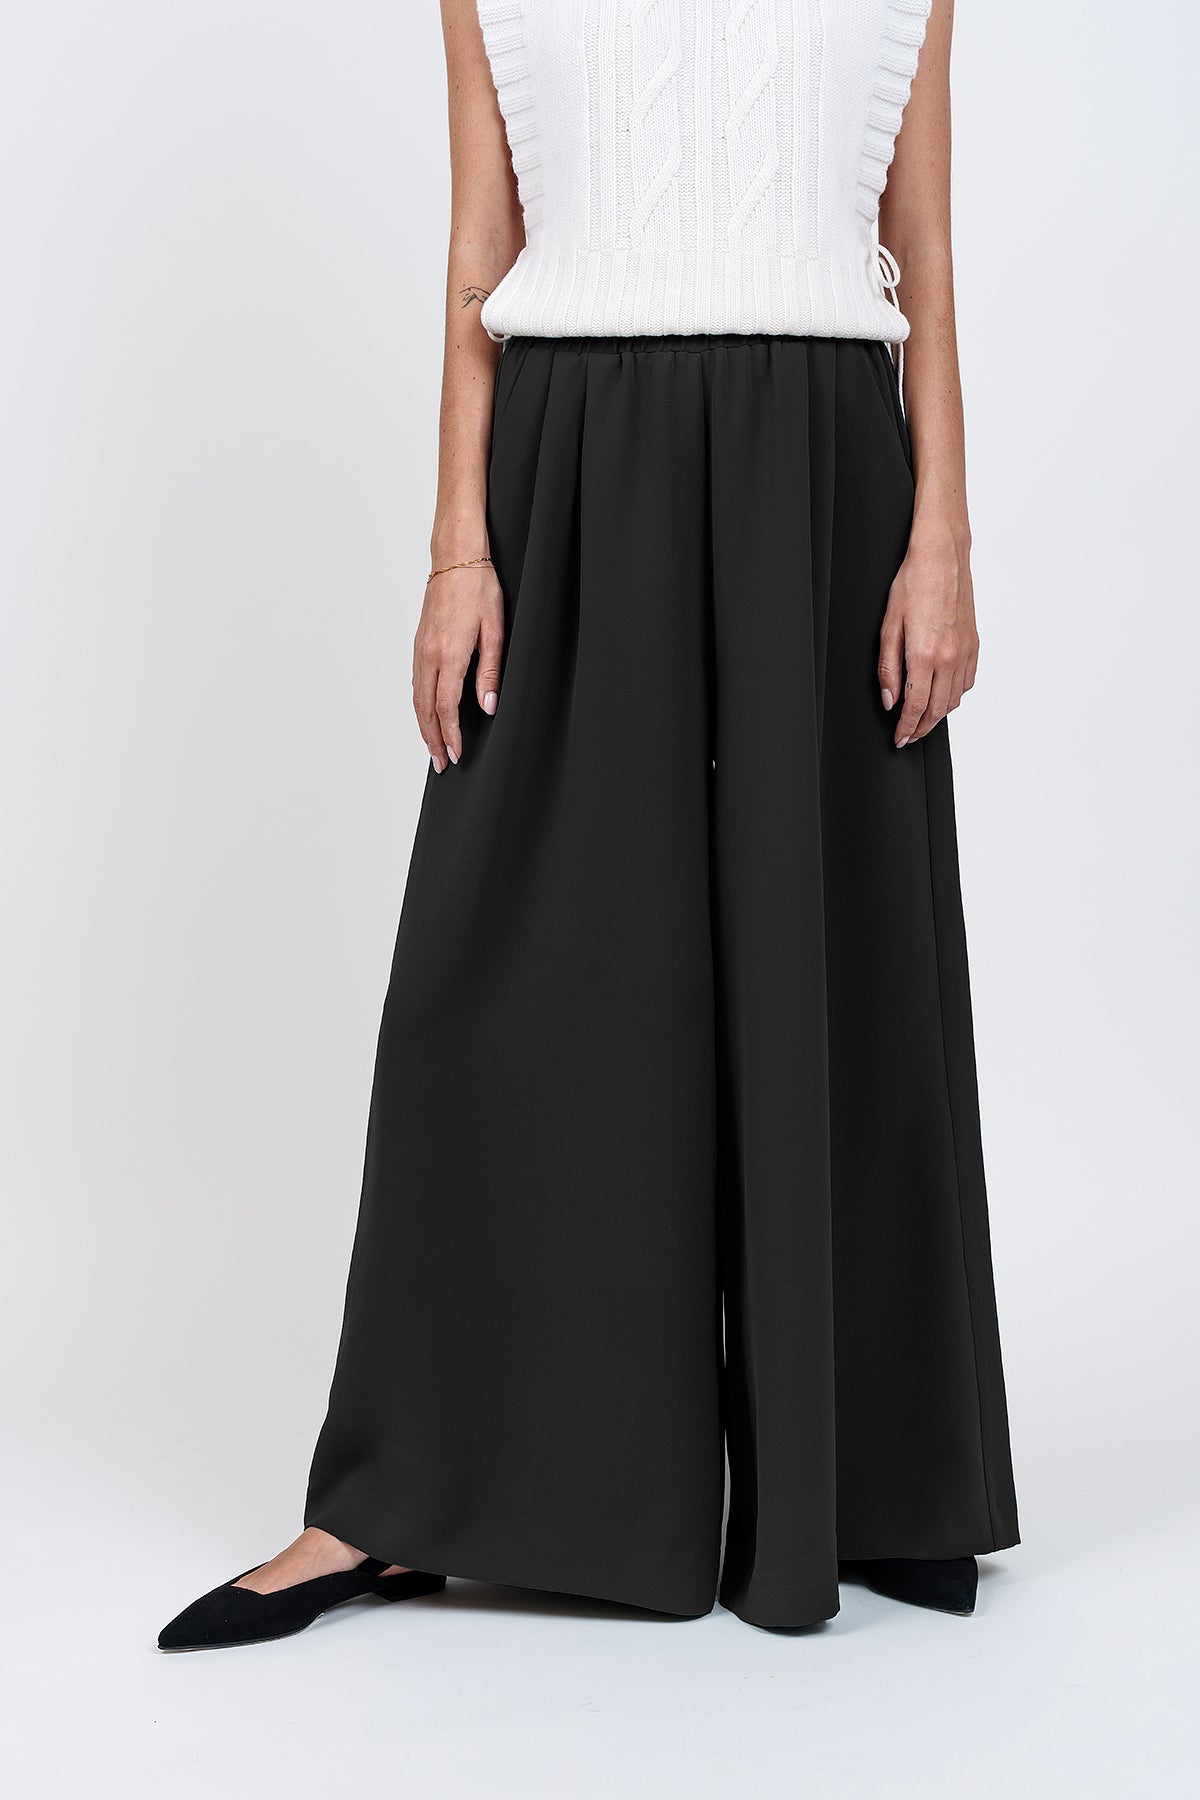 WIDE black TROUSERS